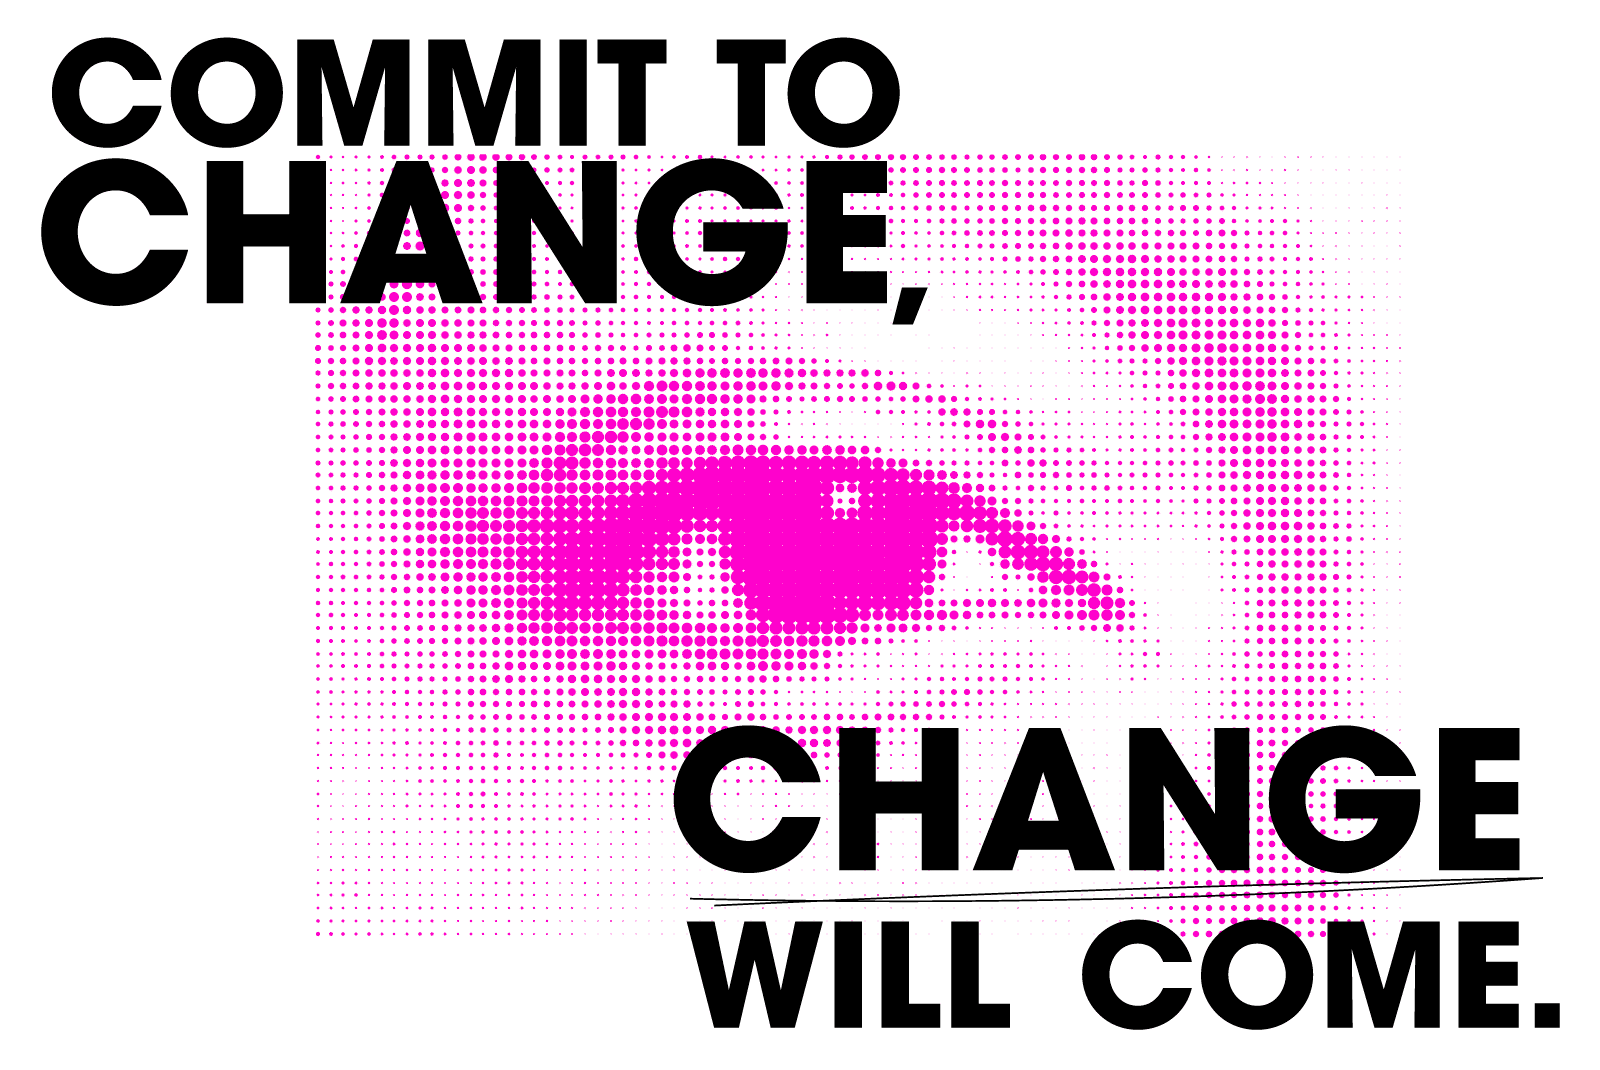 Commit to Change, Change Will Come.